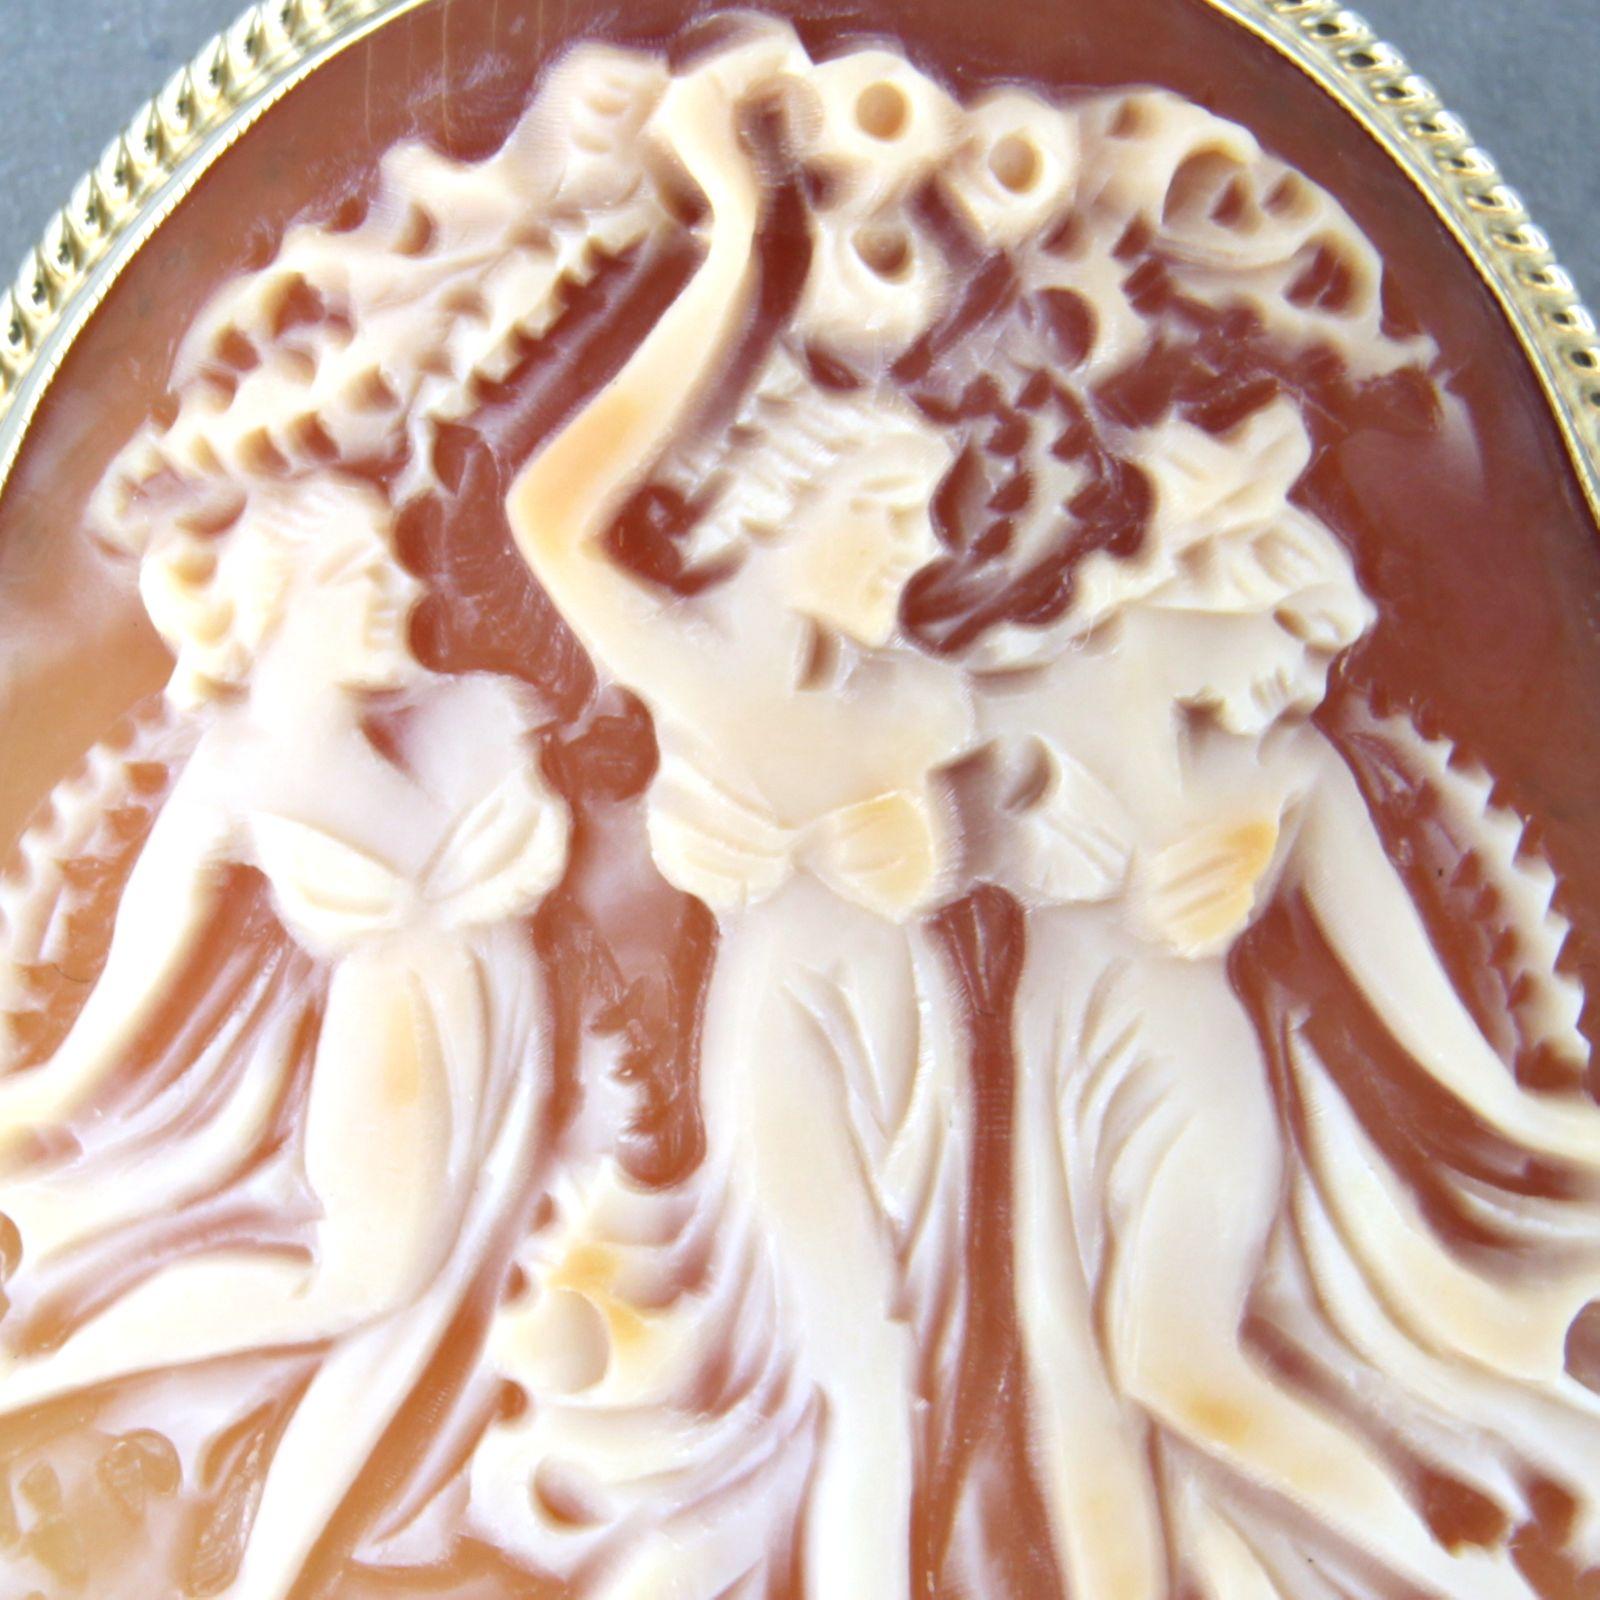 9k yellow gold cameo brooch – size 5.3 cm x 4.0 cm

Detailed description

the size of the brooch is 5.3 cm by 4.0 cm wide

weight 15.2 grams

set with

- 1 x 4.8 cm x 3.7 cm oval cut cameo

color brown-white
purity….
Gemstones have often been